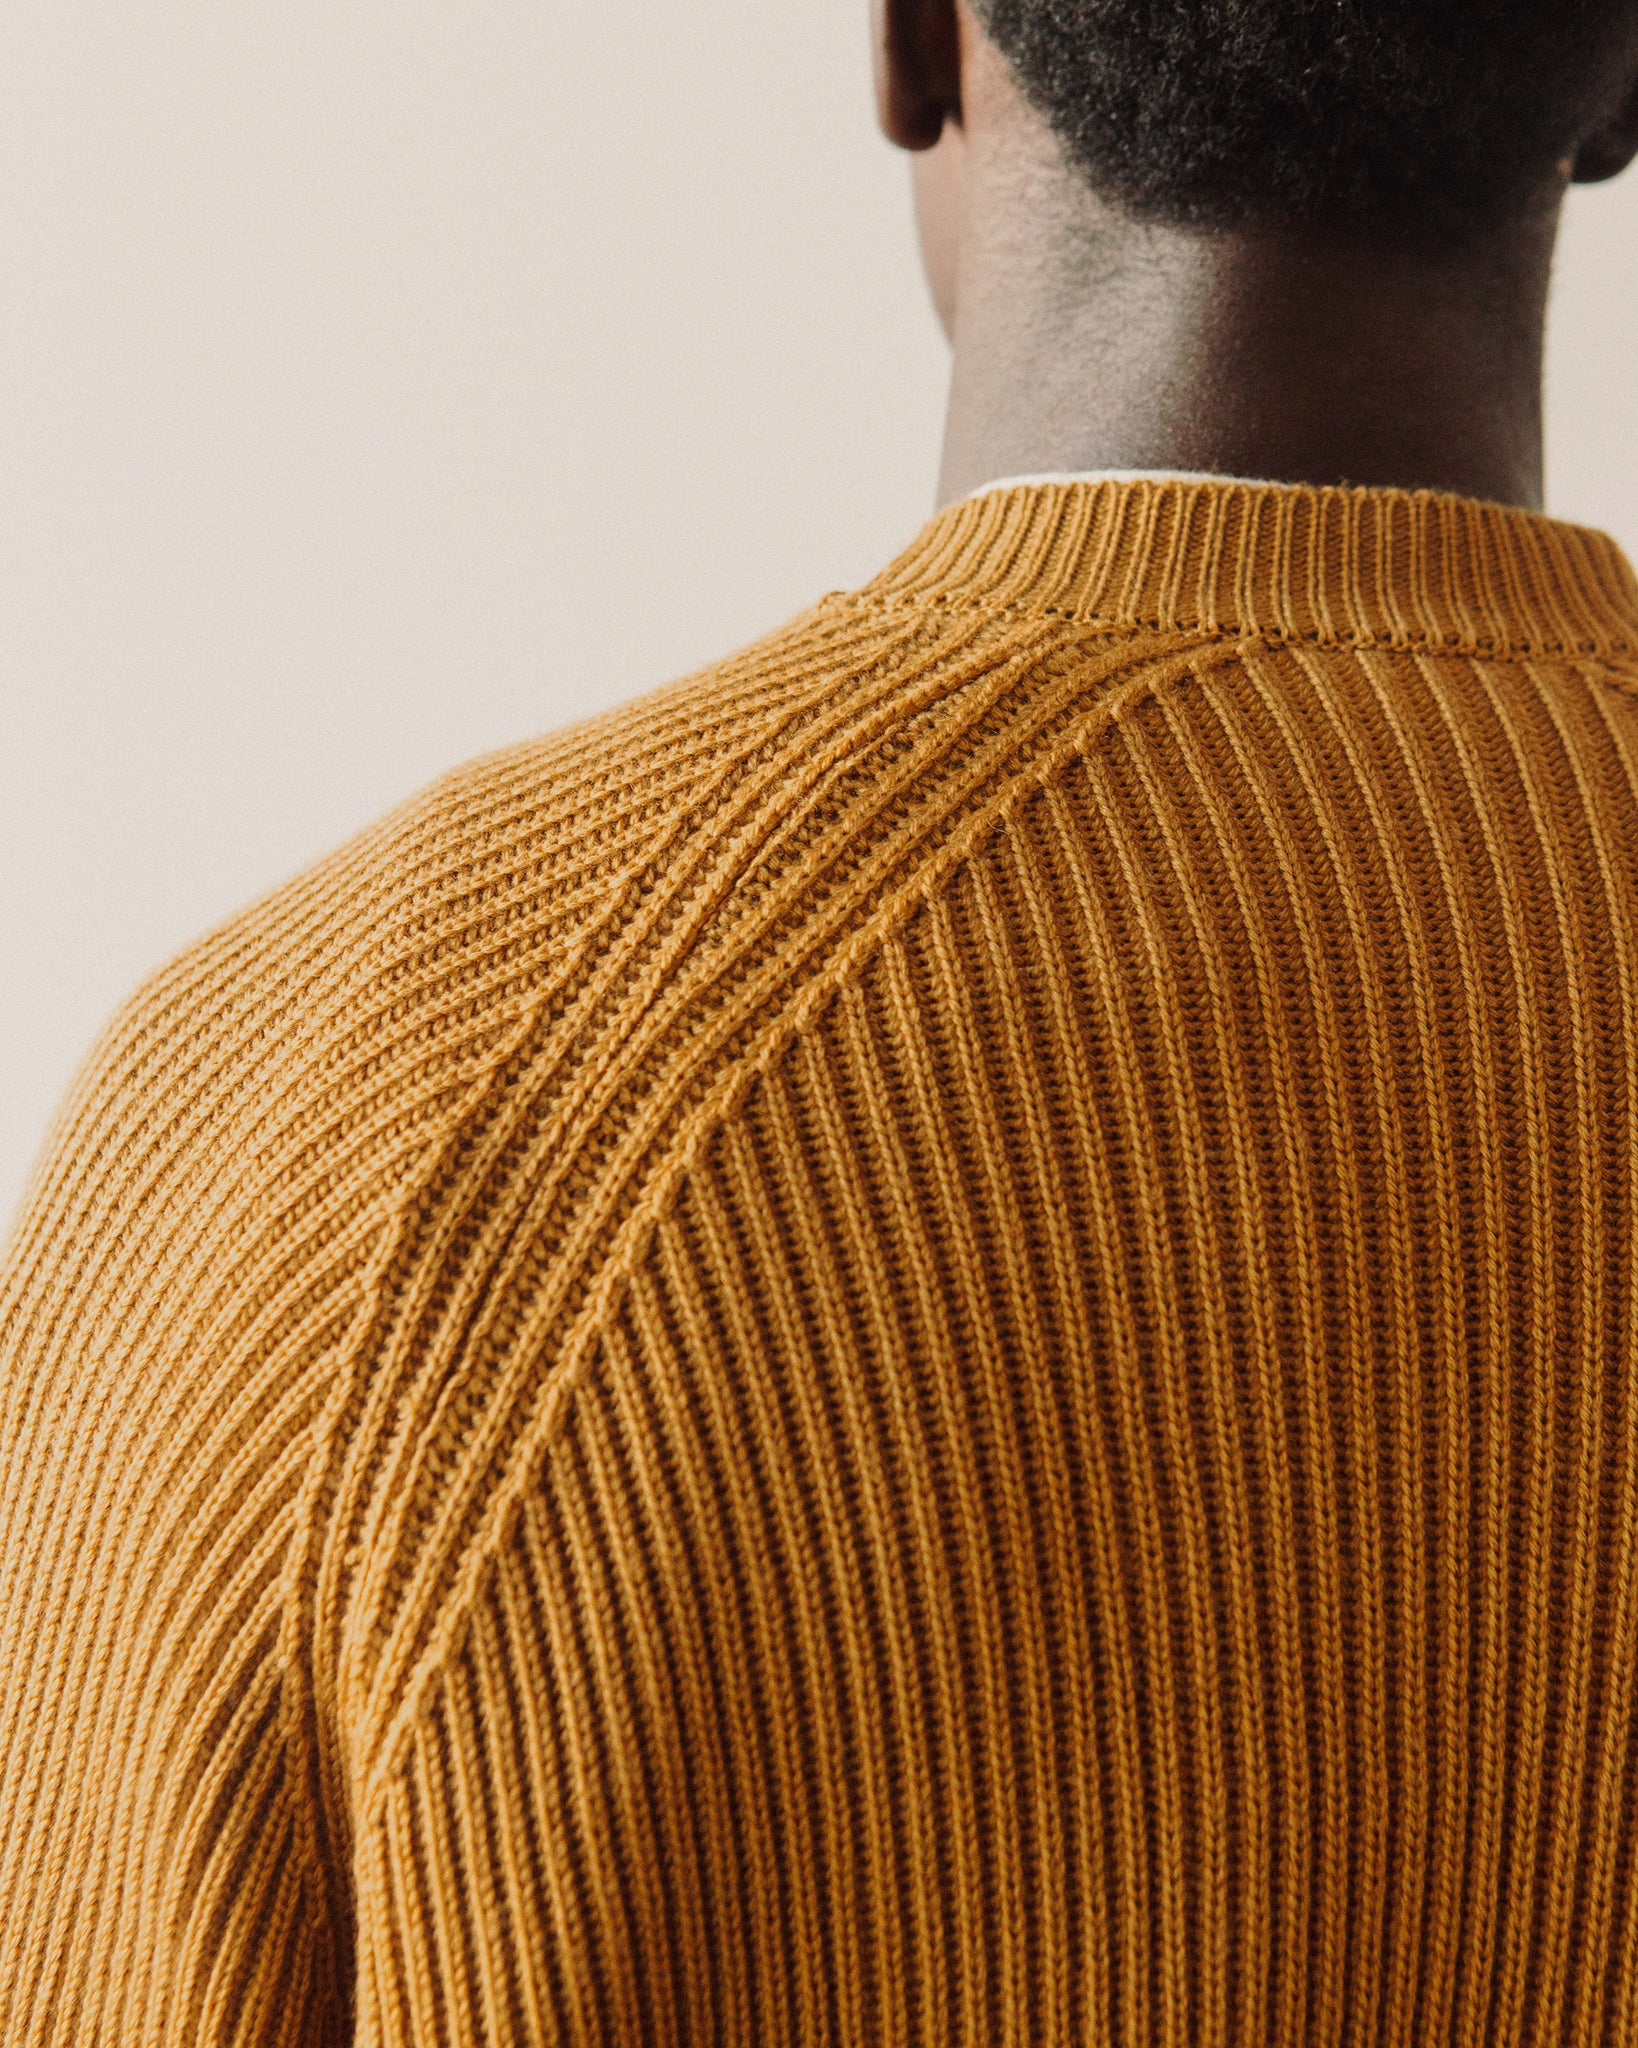 O-Project Knitted Crew Neck, Mustard